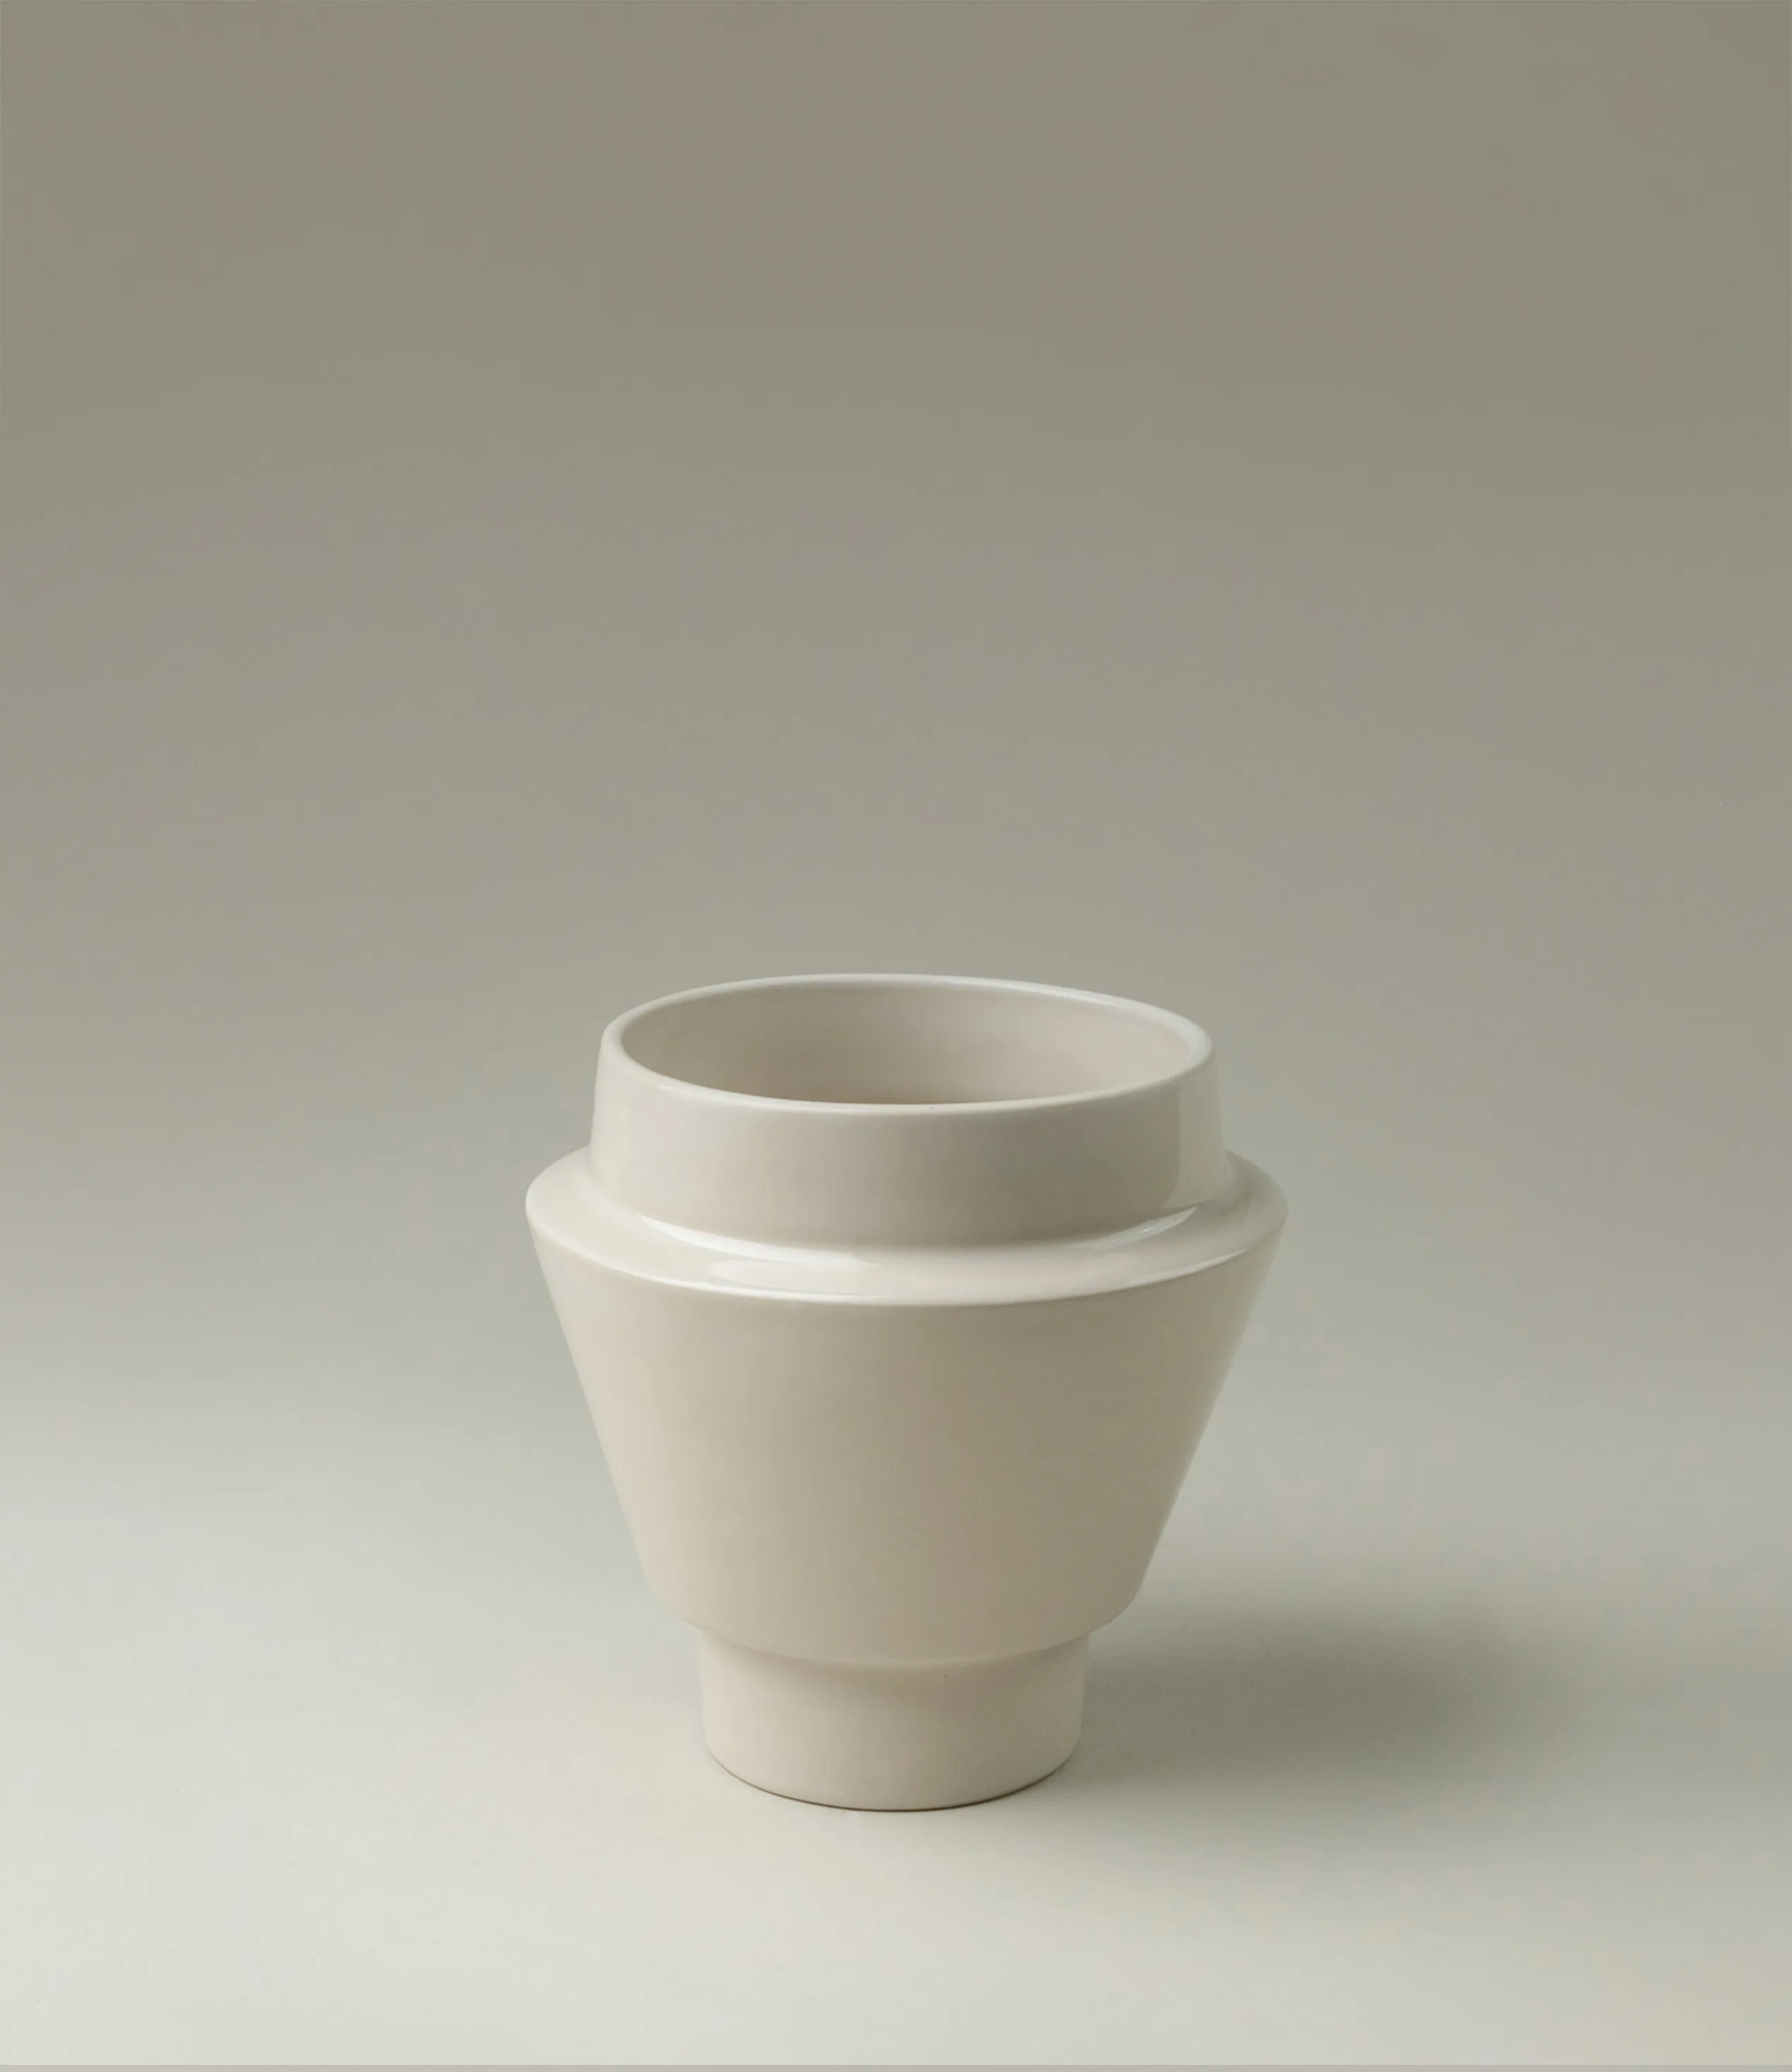 SW Buoy Planter from Nova Casa Atlantica comes in a white color. The product is glazed and has a glossy finishing.